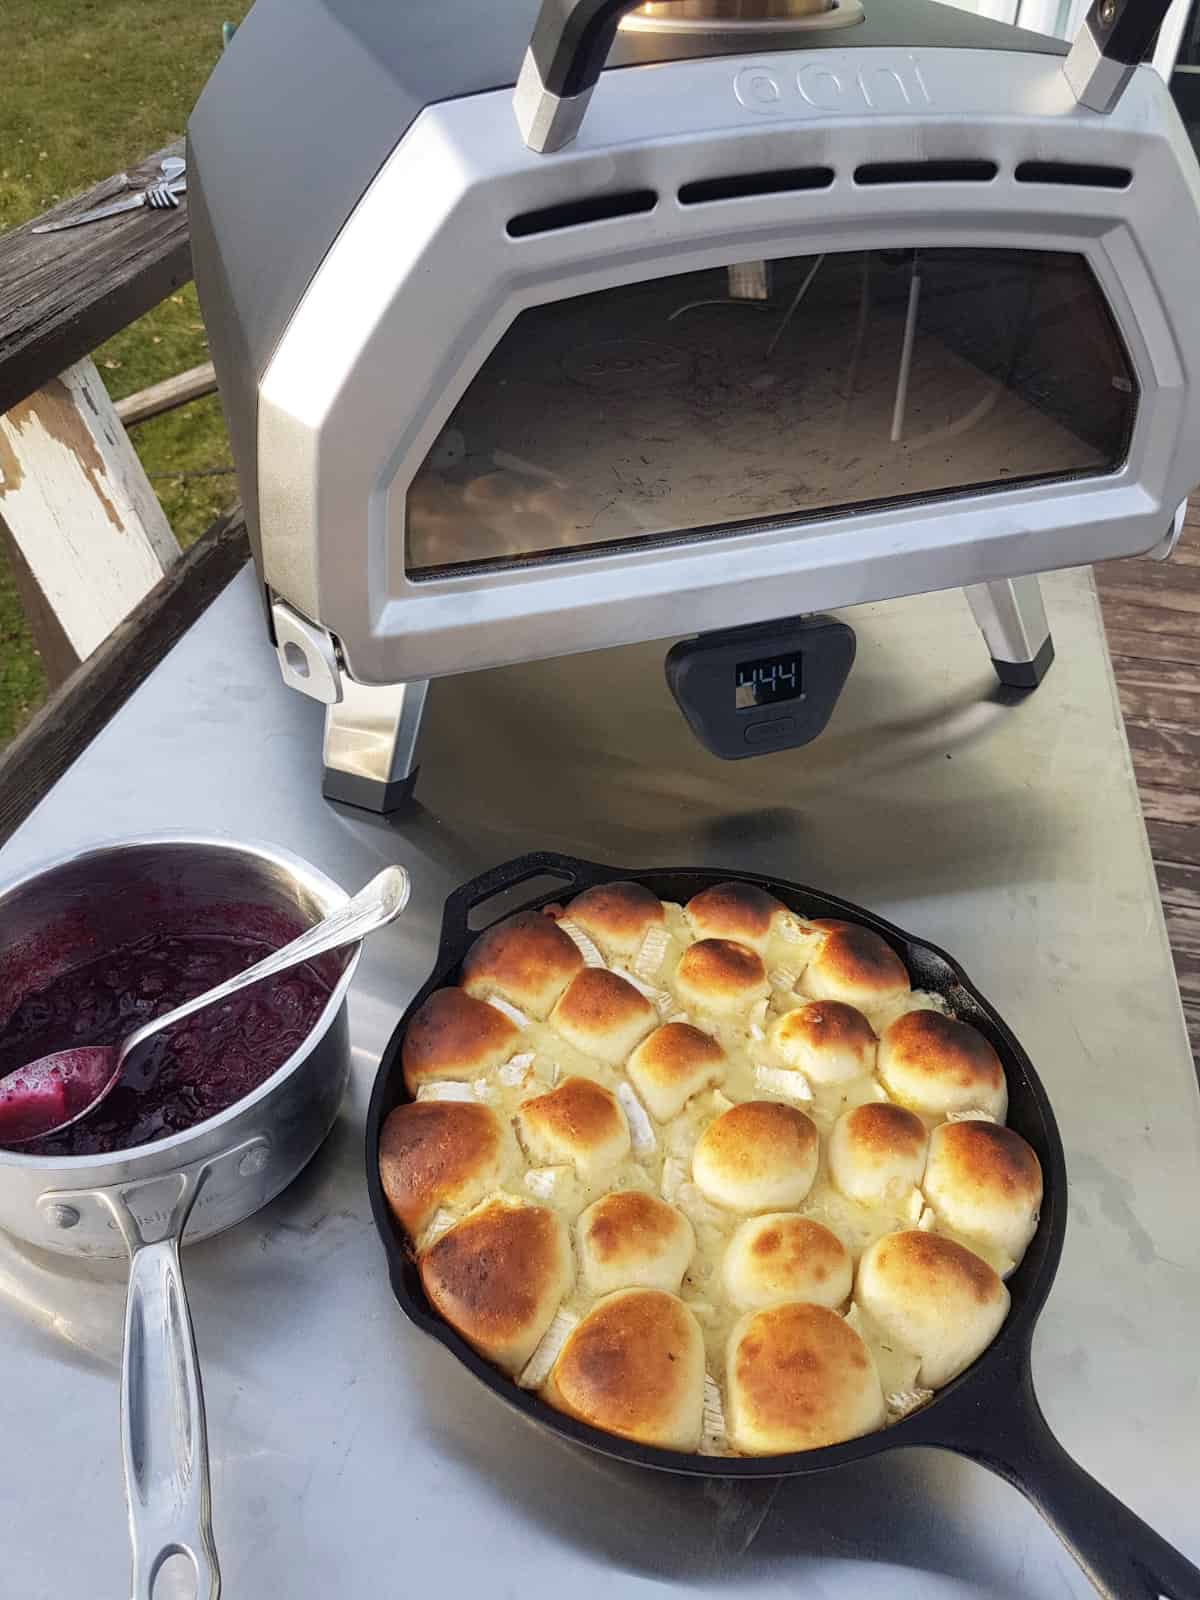 Freshly baked cranberry brie pull apart bread, in front of a Ooni pizza oven.